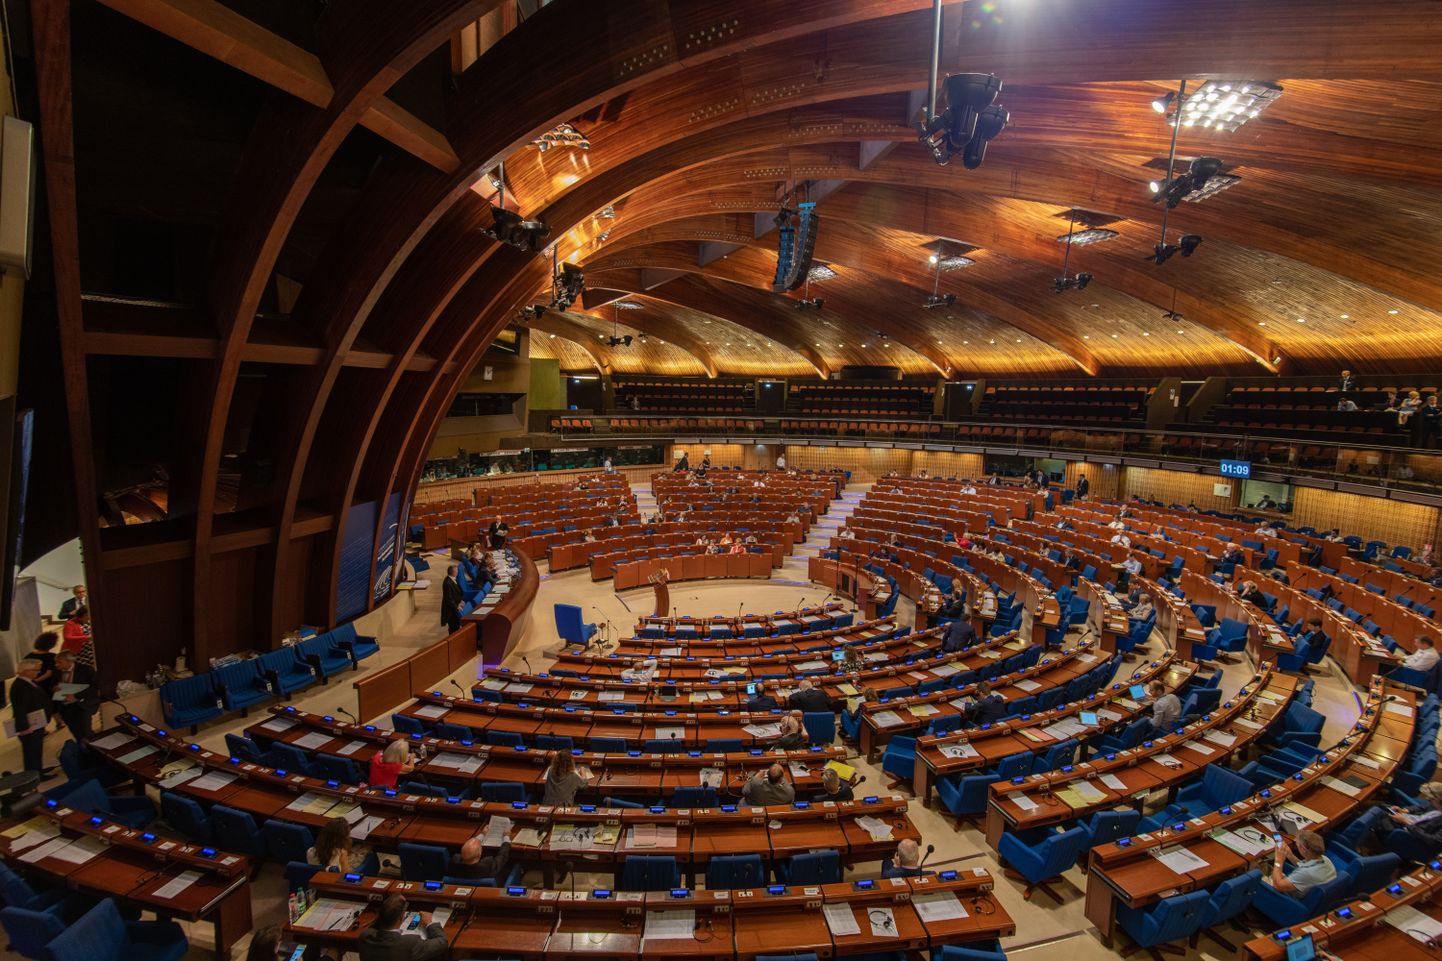 5928019 26.06.2019 A general view of the hall during a session of the Parliamentary Assembly of the Council of Europe (PACE), in Strasbourg, France. The PACE has officially invited the Russian delegation to participate in the June session. In April 2014, Russia was stripped of its voting rights in PACE in the wake of the Ukrainian crisis and aftermath of the Crimea referendum. Since 2016, the Russian delegation has not been renewing its credentials ahead of the assembly's sessions in protest of the discrimination it faces within the organization. The country has also frozen its contributions to the Council of Europe, pledging to withhold future payments until such time as the Russian delegation’s rights are restored.  Dominique Boutin / Sputnik